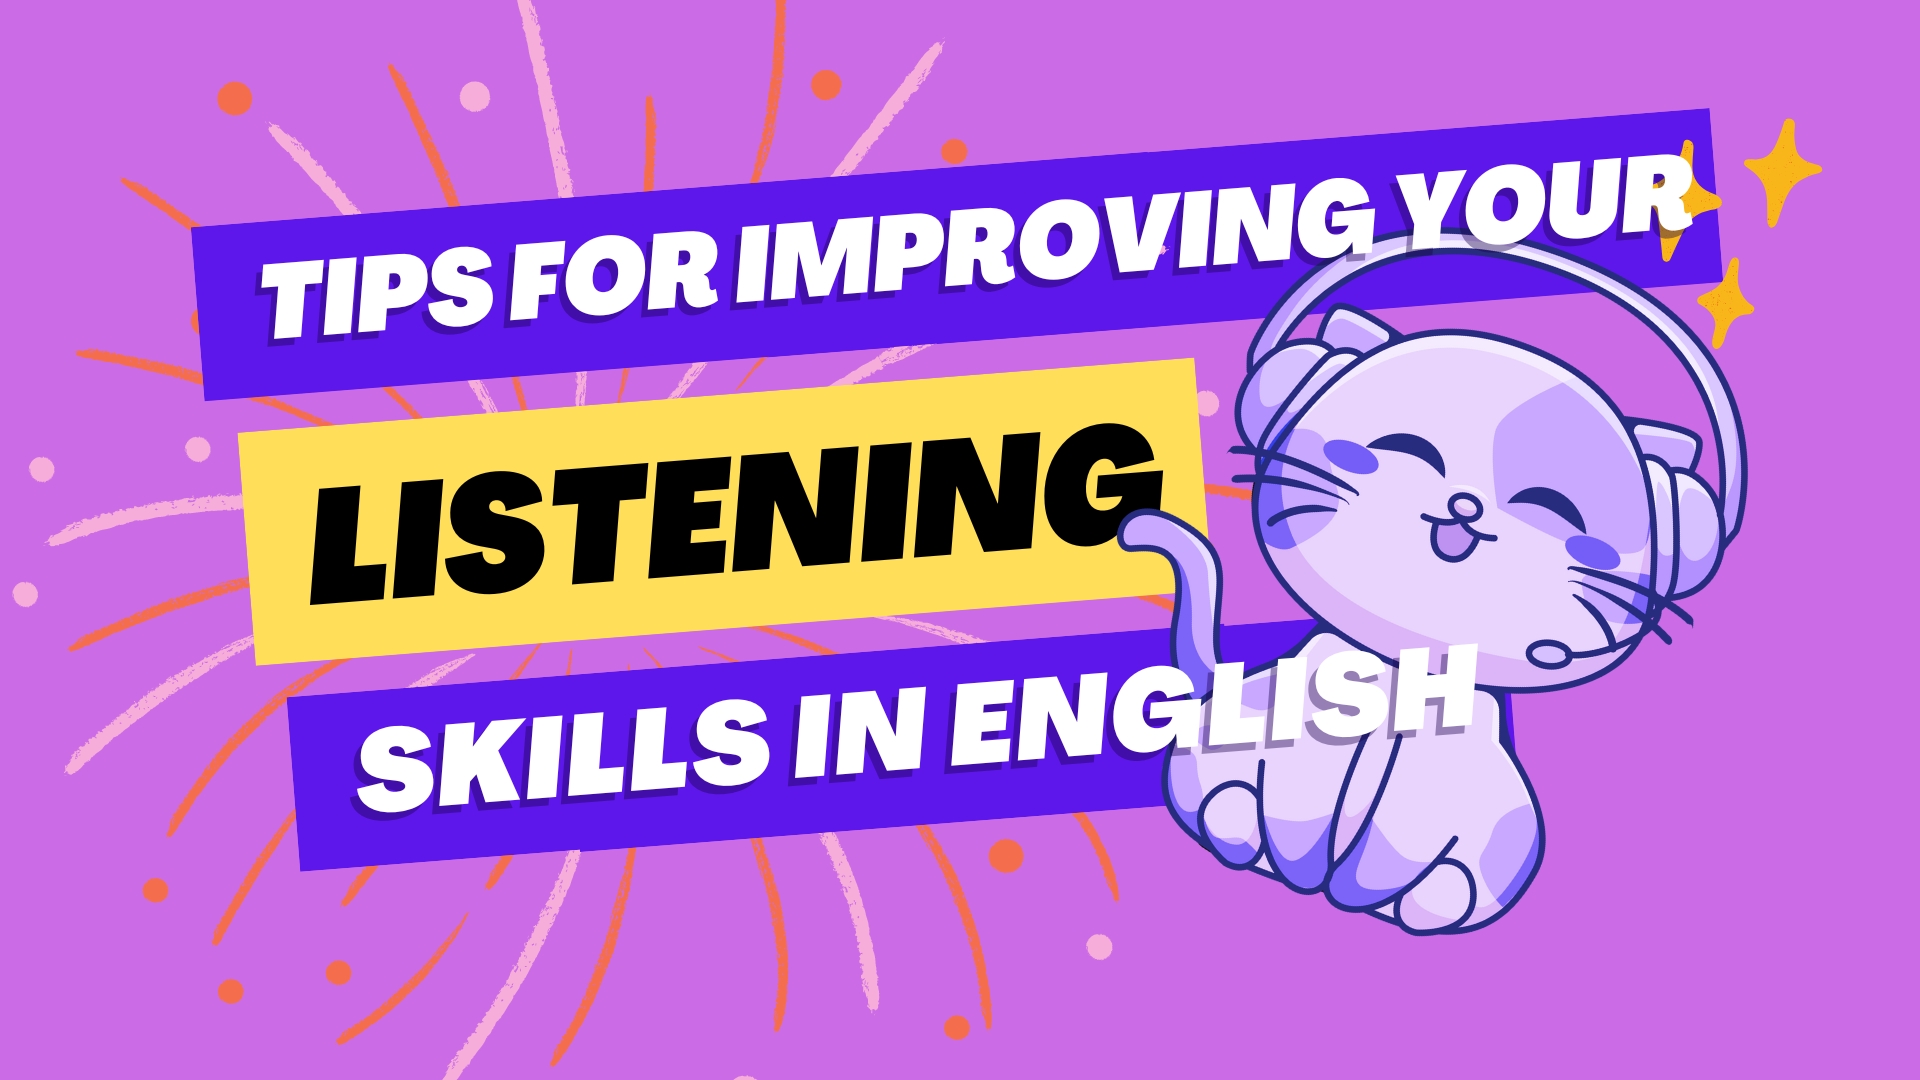 7-tips-for-improving-your-listening-skills-in-english-polyglotopia